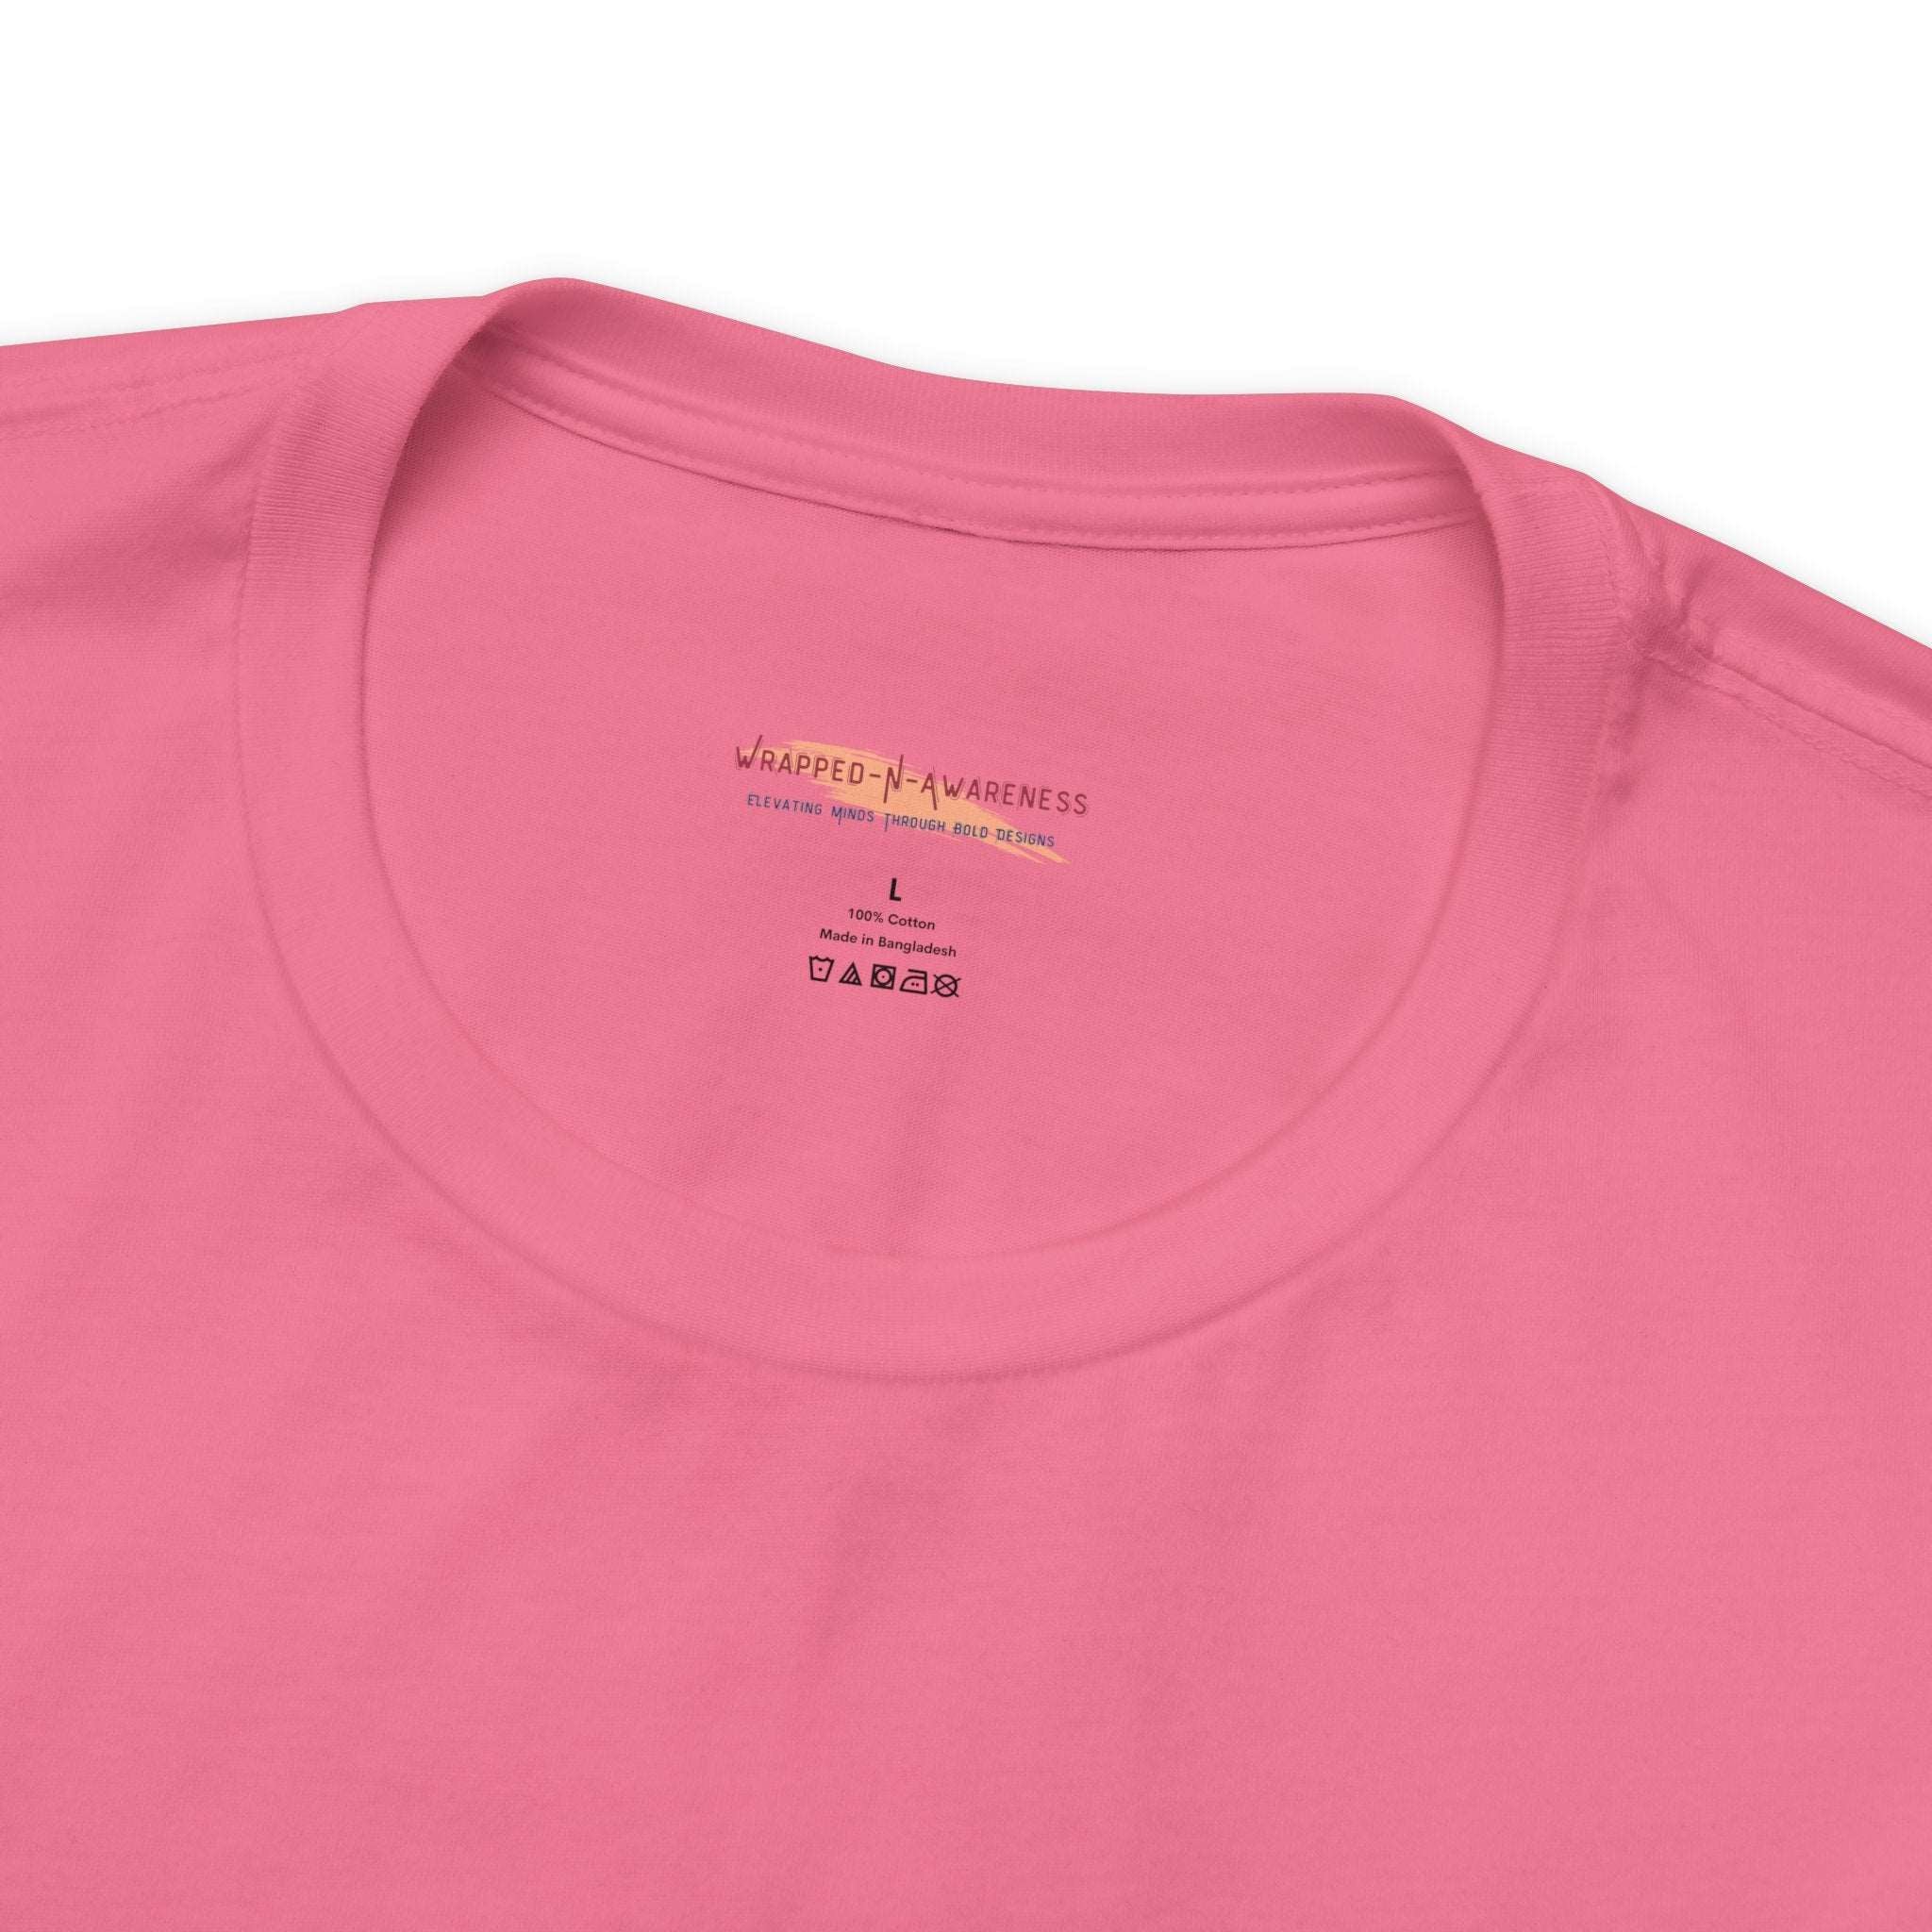 Brave Blossoms Jersey Tee - Bella+Canvas 3001 Charity Pink Classic Tee Comfortable Tee Cotton T-Shirt Graphic Tee JerseyTee Statement Shirt T-shirt Tee Unisex Apparel T-Shirt 3233082843097798853_2048_68d607b6-1208-41d7-b4ed-969133ea1cba Printify